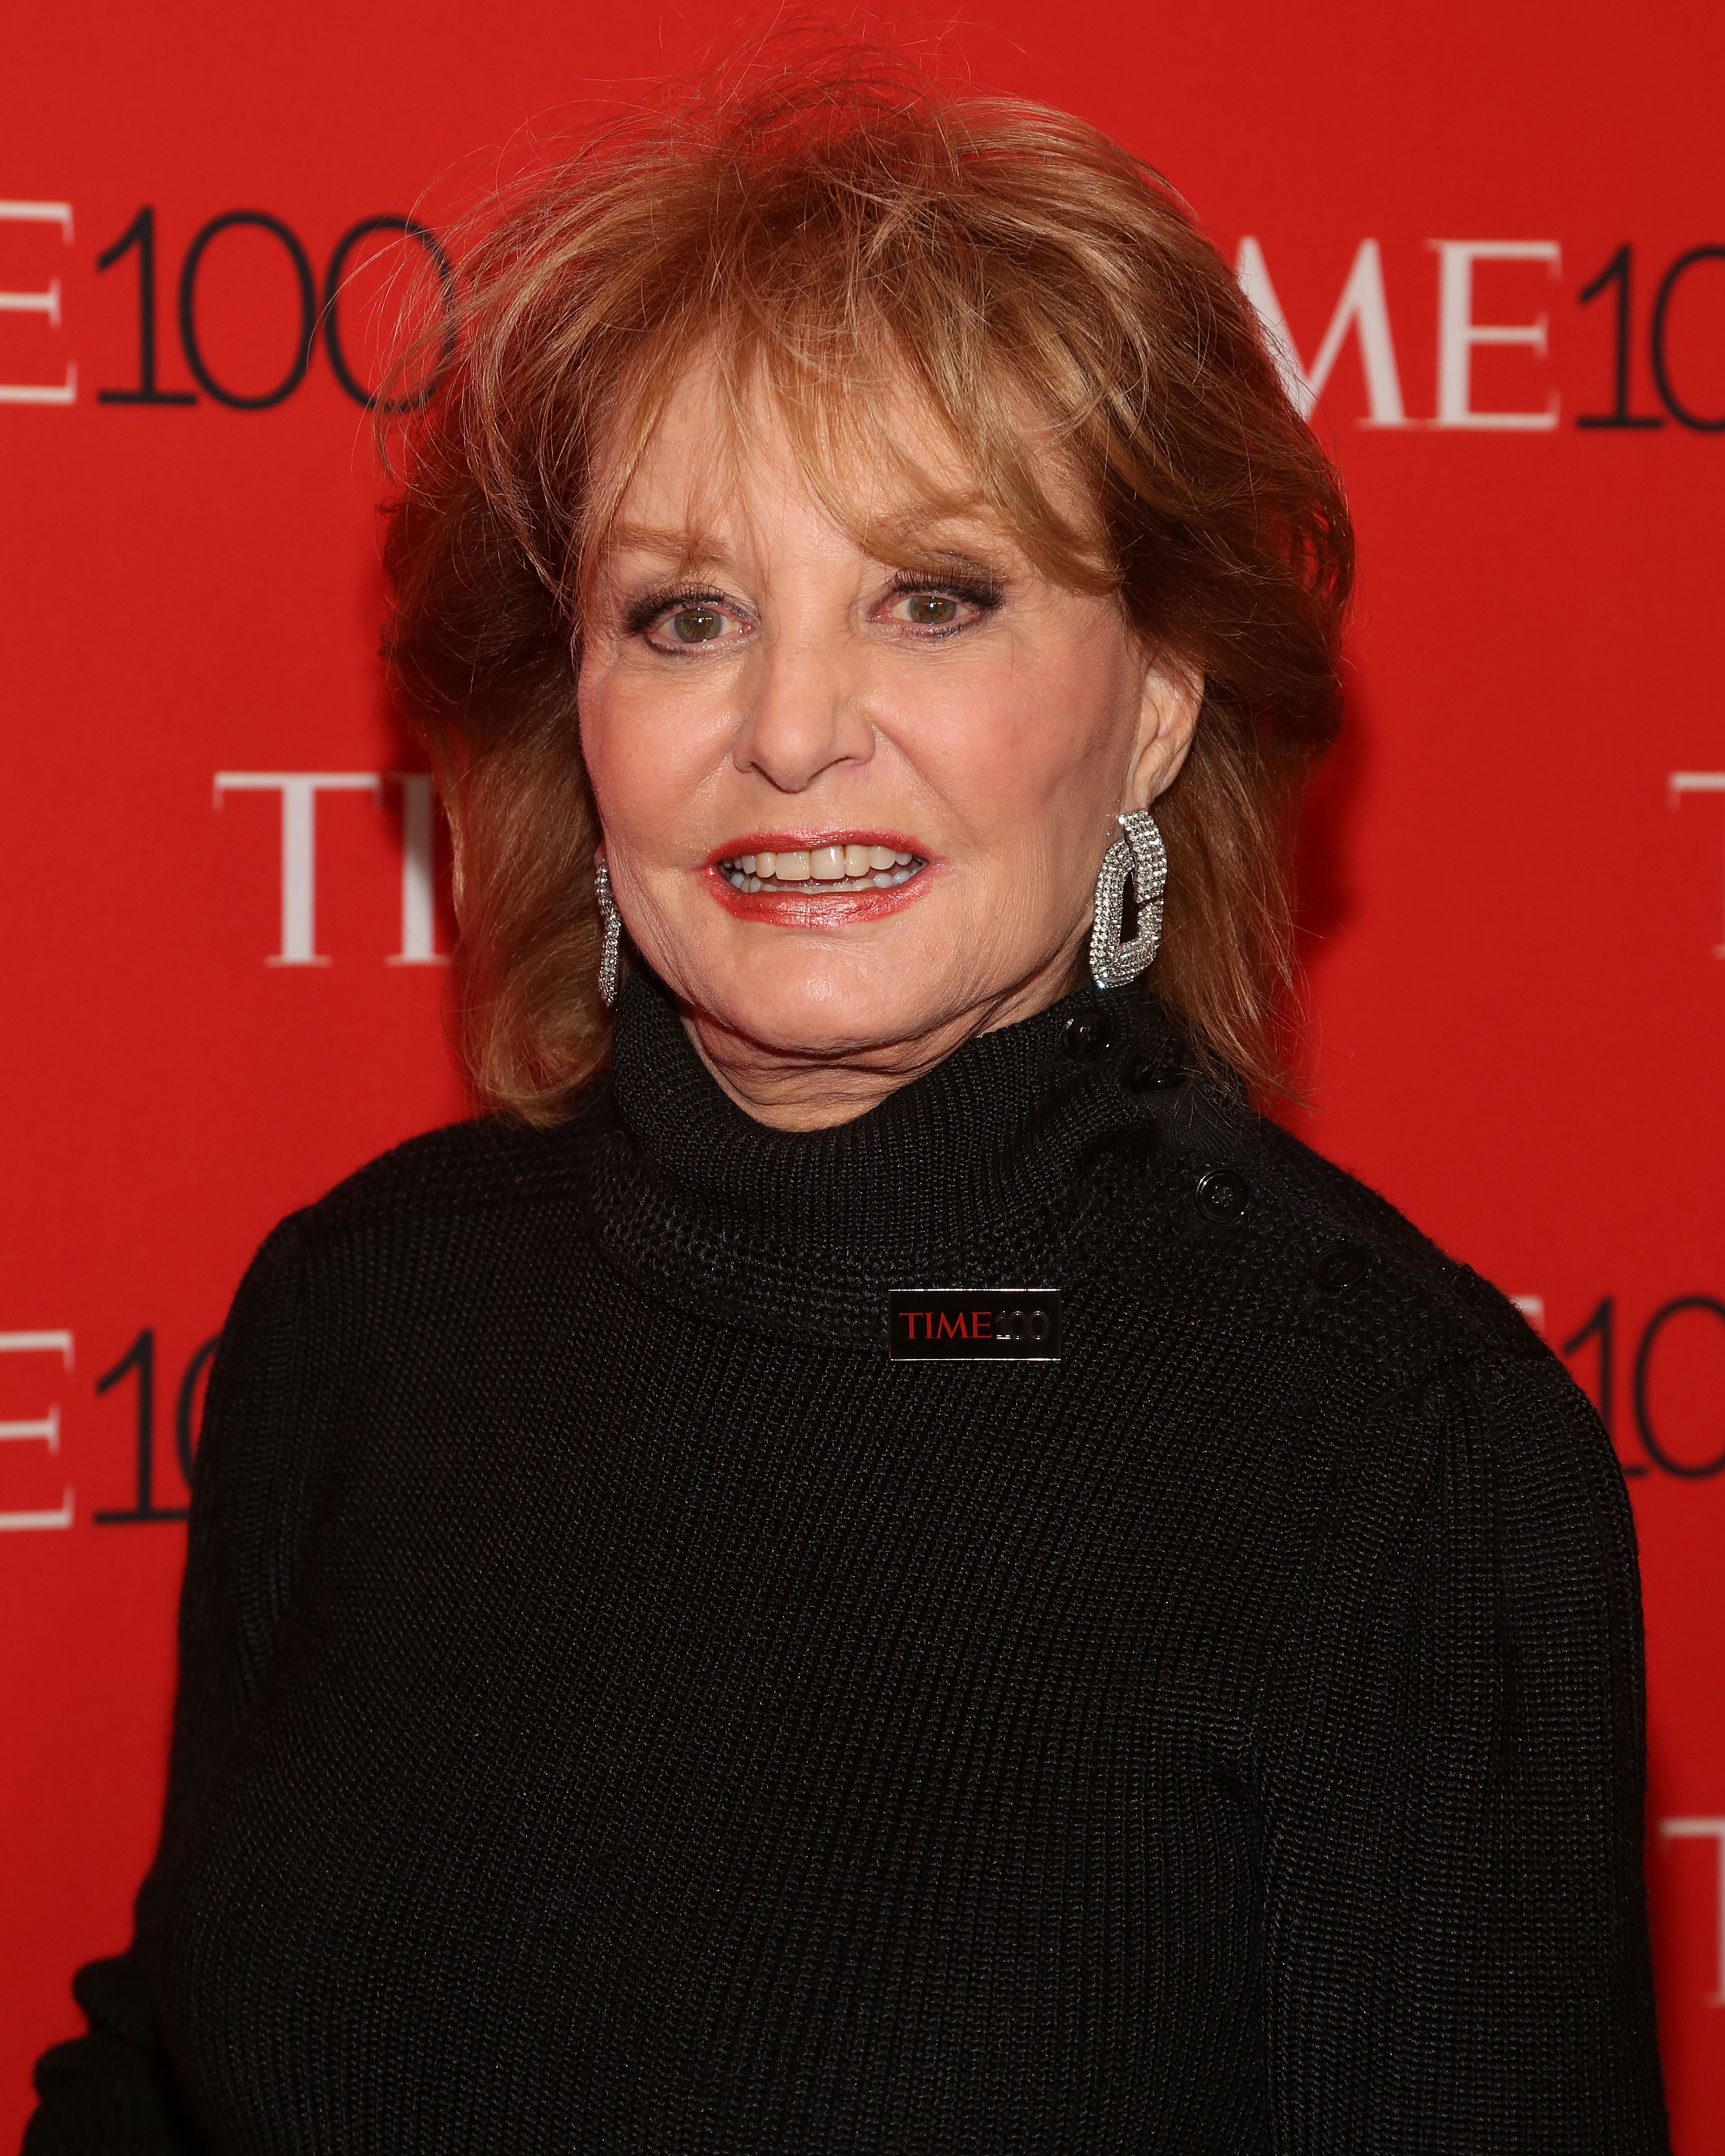 TV personality Barbara Walters attending the 2015 Time 100 Gala at Frederick P. Rose Hall, Jazz at Lincoln Center on April 21, 2015 in New York City. / Source: Getty Images